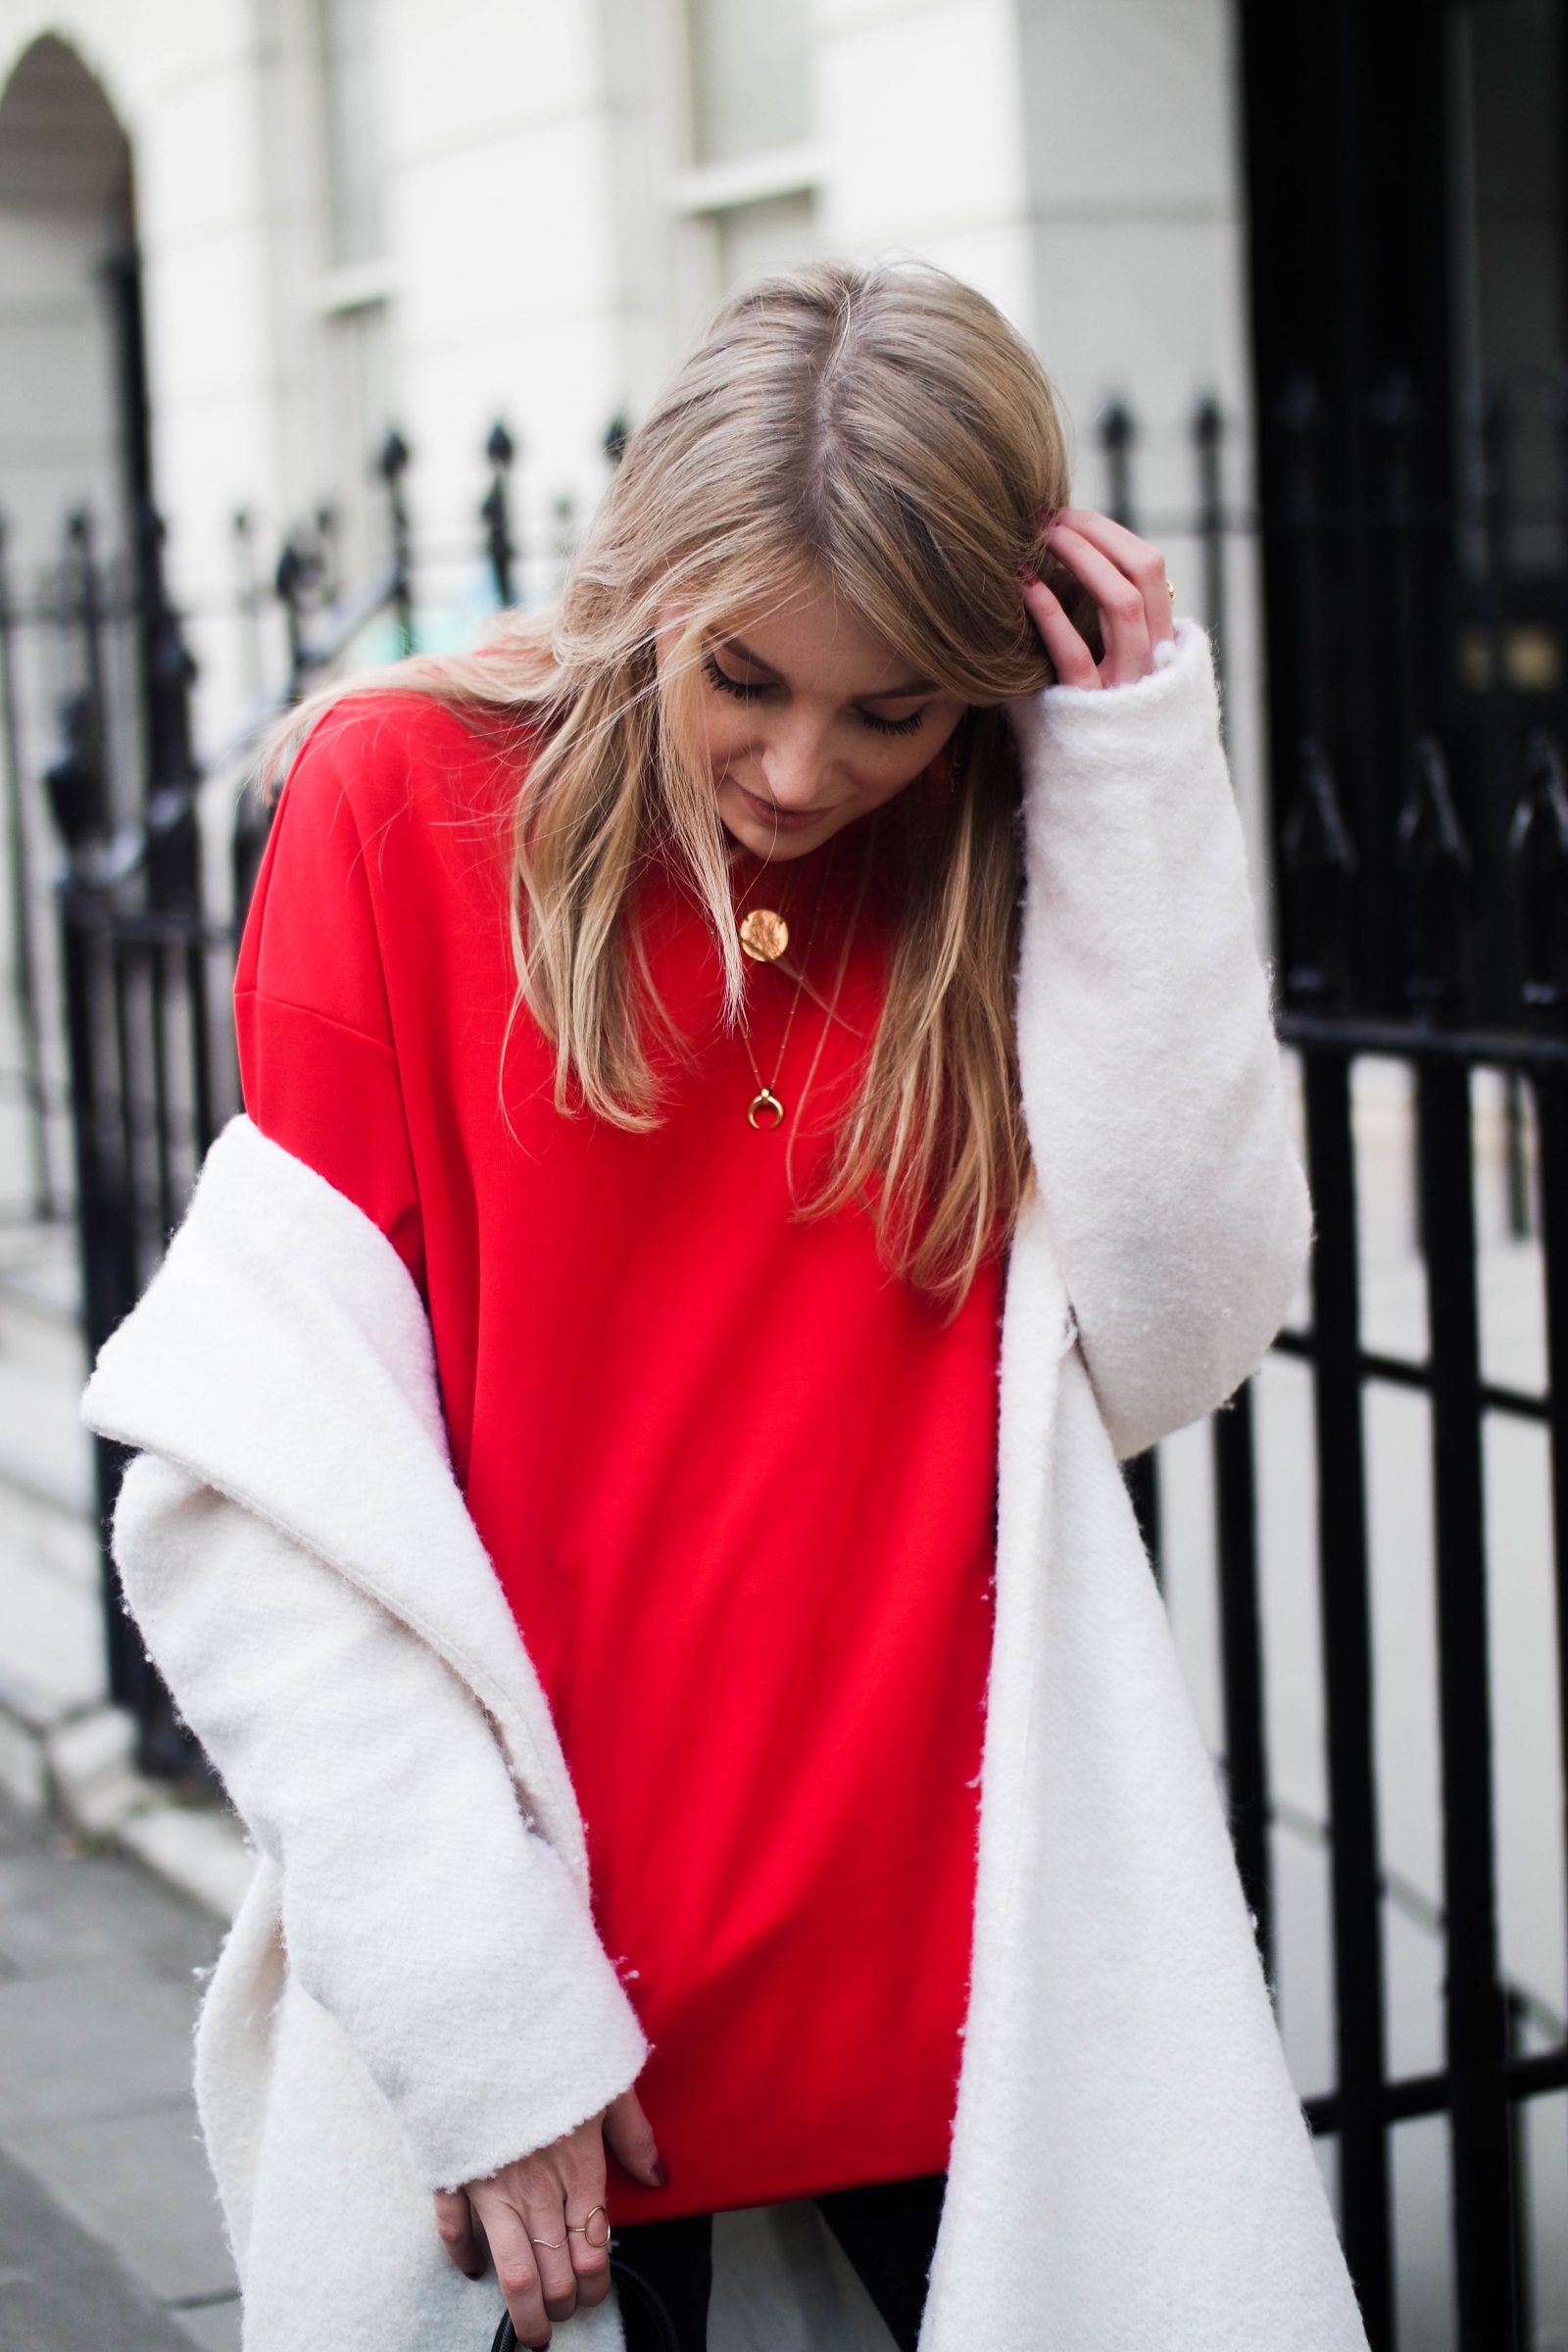 LFW DAY 2 - Red Alert - Fashion Blogger Street Style